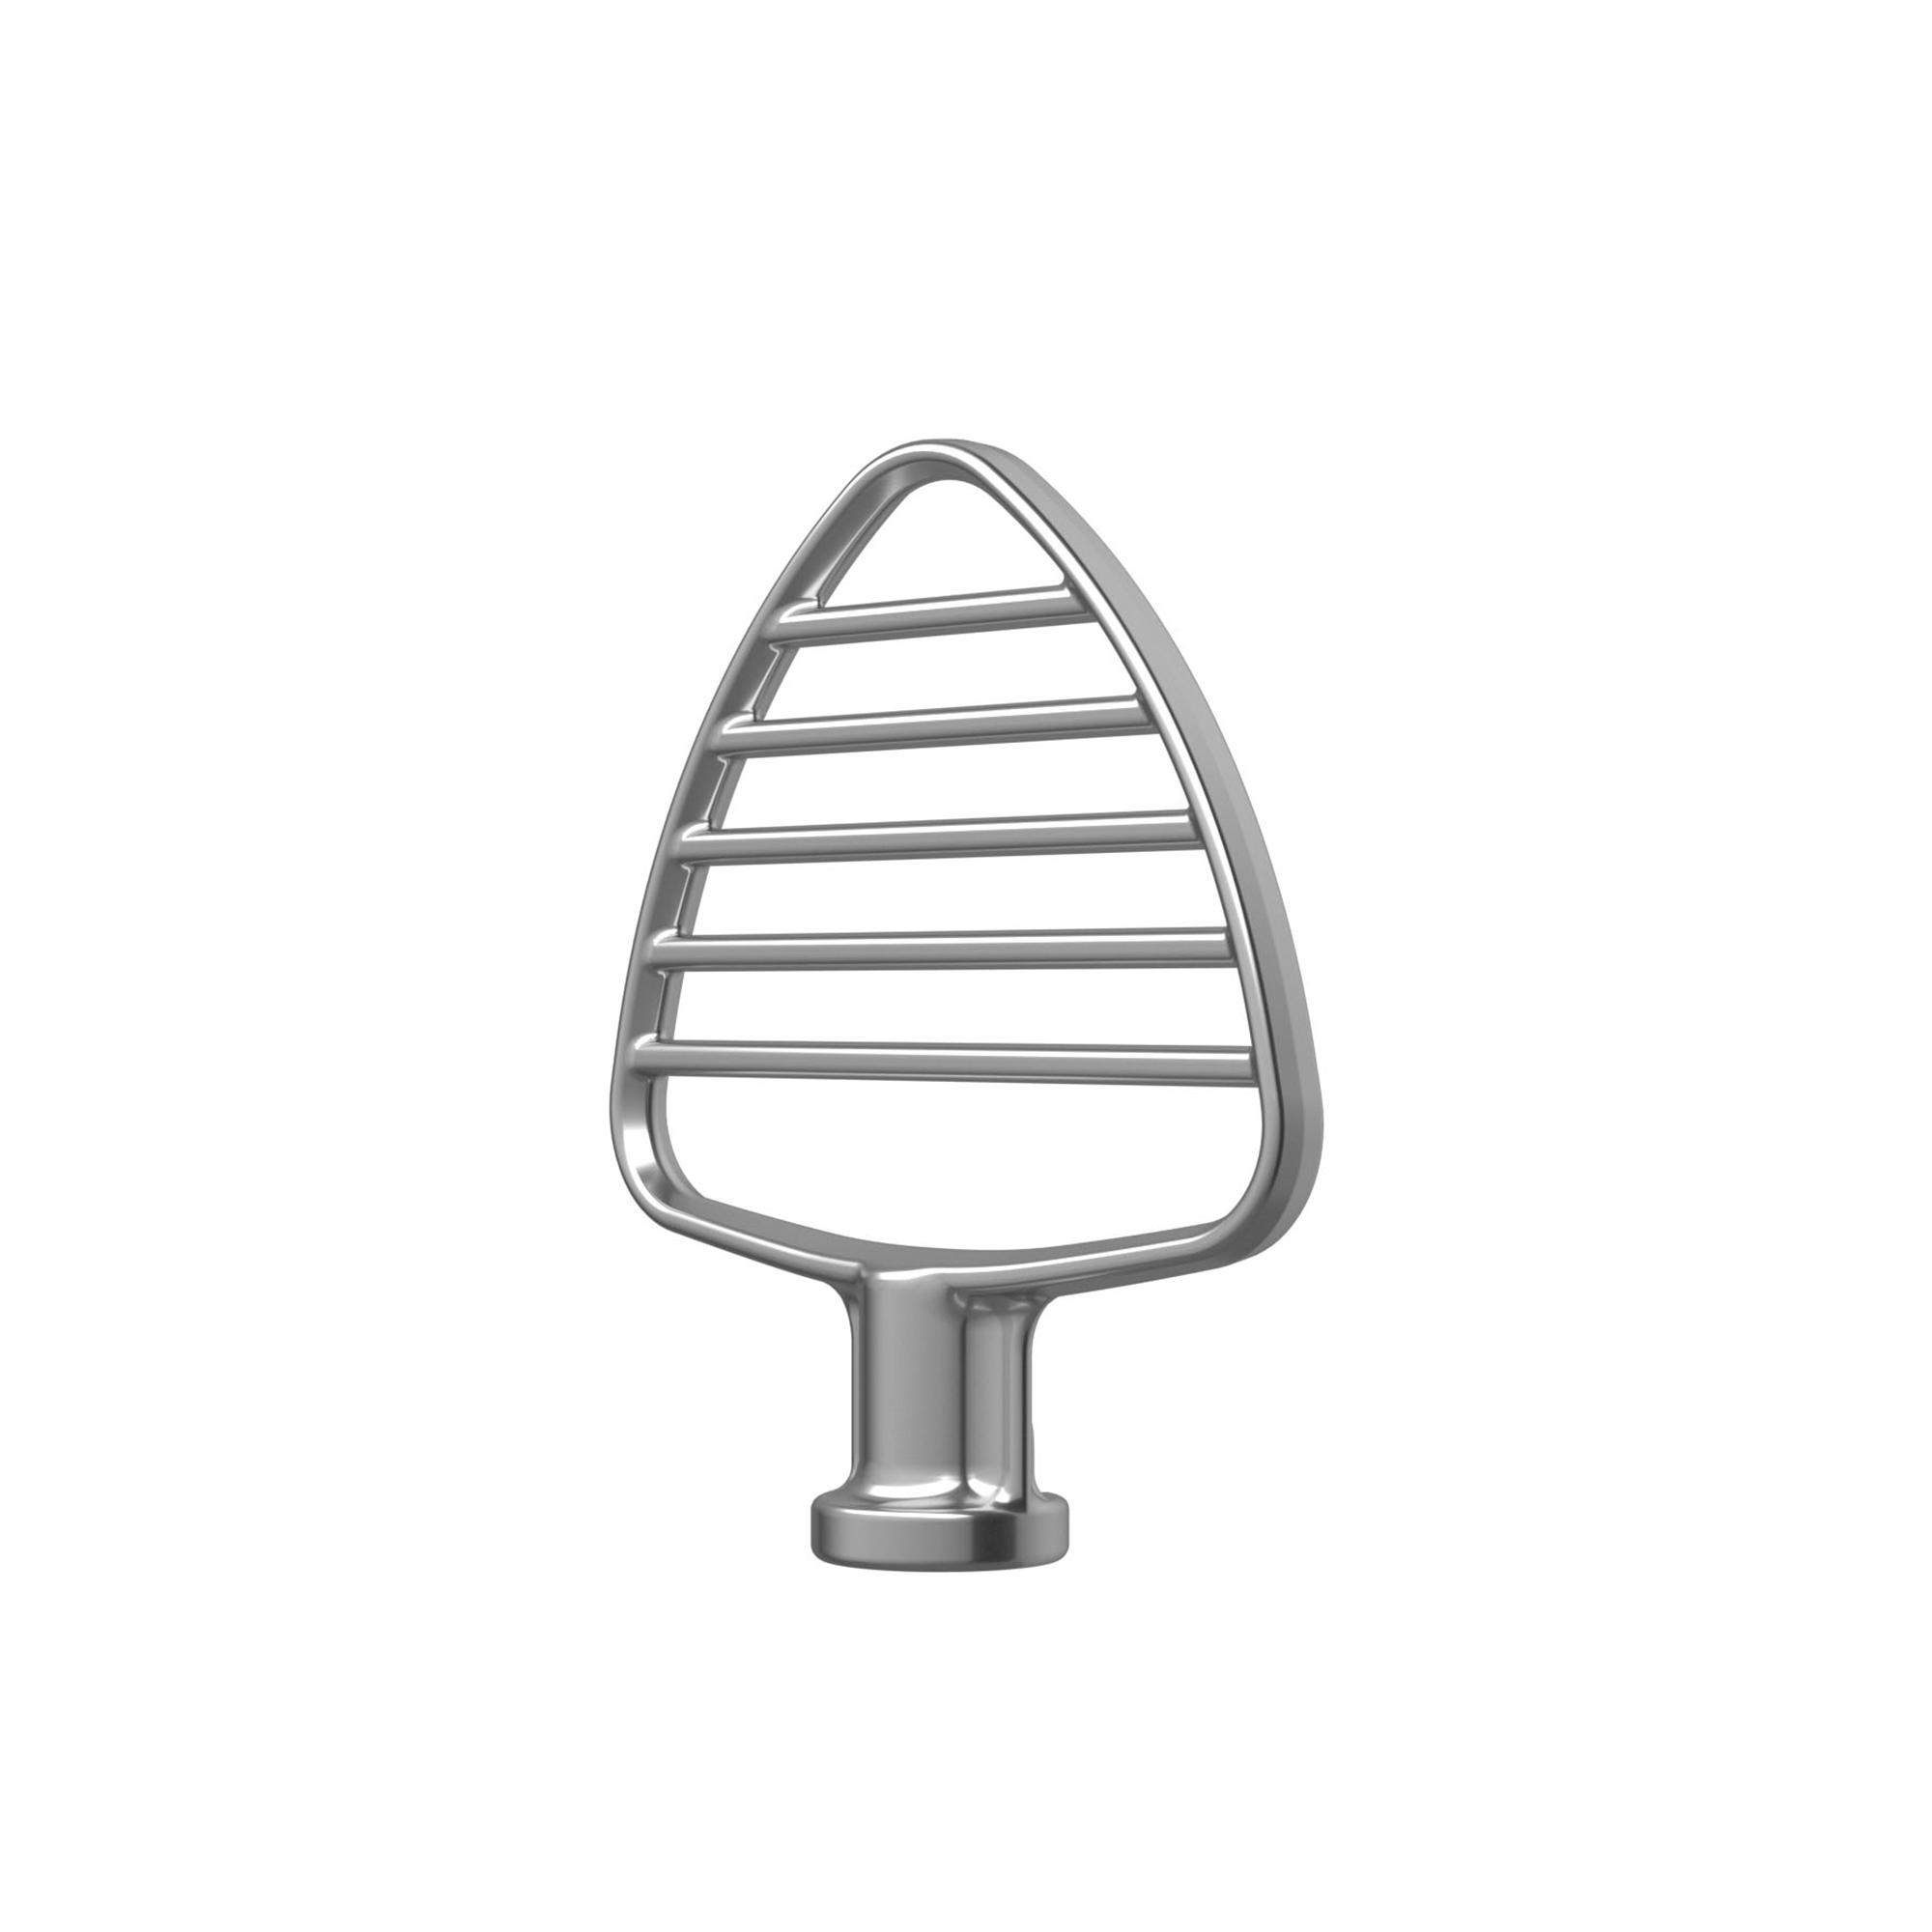 KitchenAid Pastry Beater for Tilt Head Stand Mixer Subtle Silver Image 5